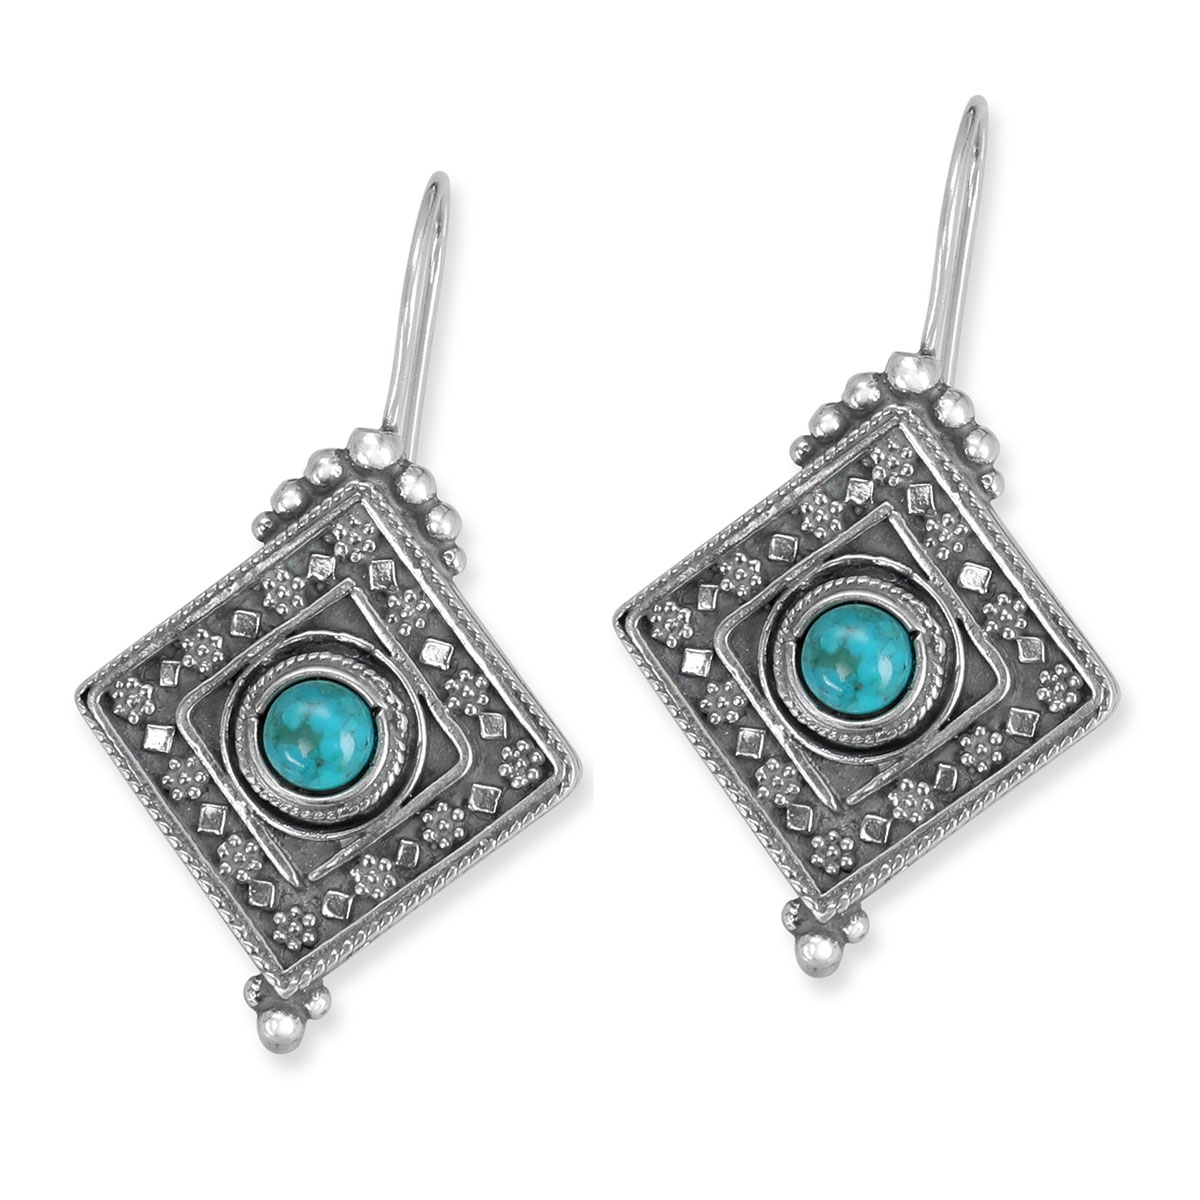 Traditional Yemenite Art Luxurious Handcrafted Sterling Silver Diamond-Shaped Earrings With Eilat Stone - 1